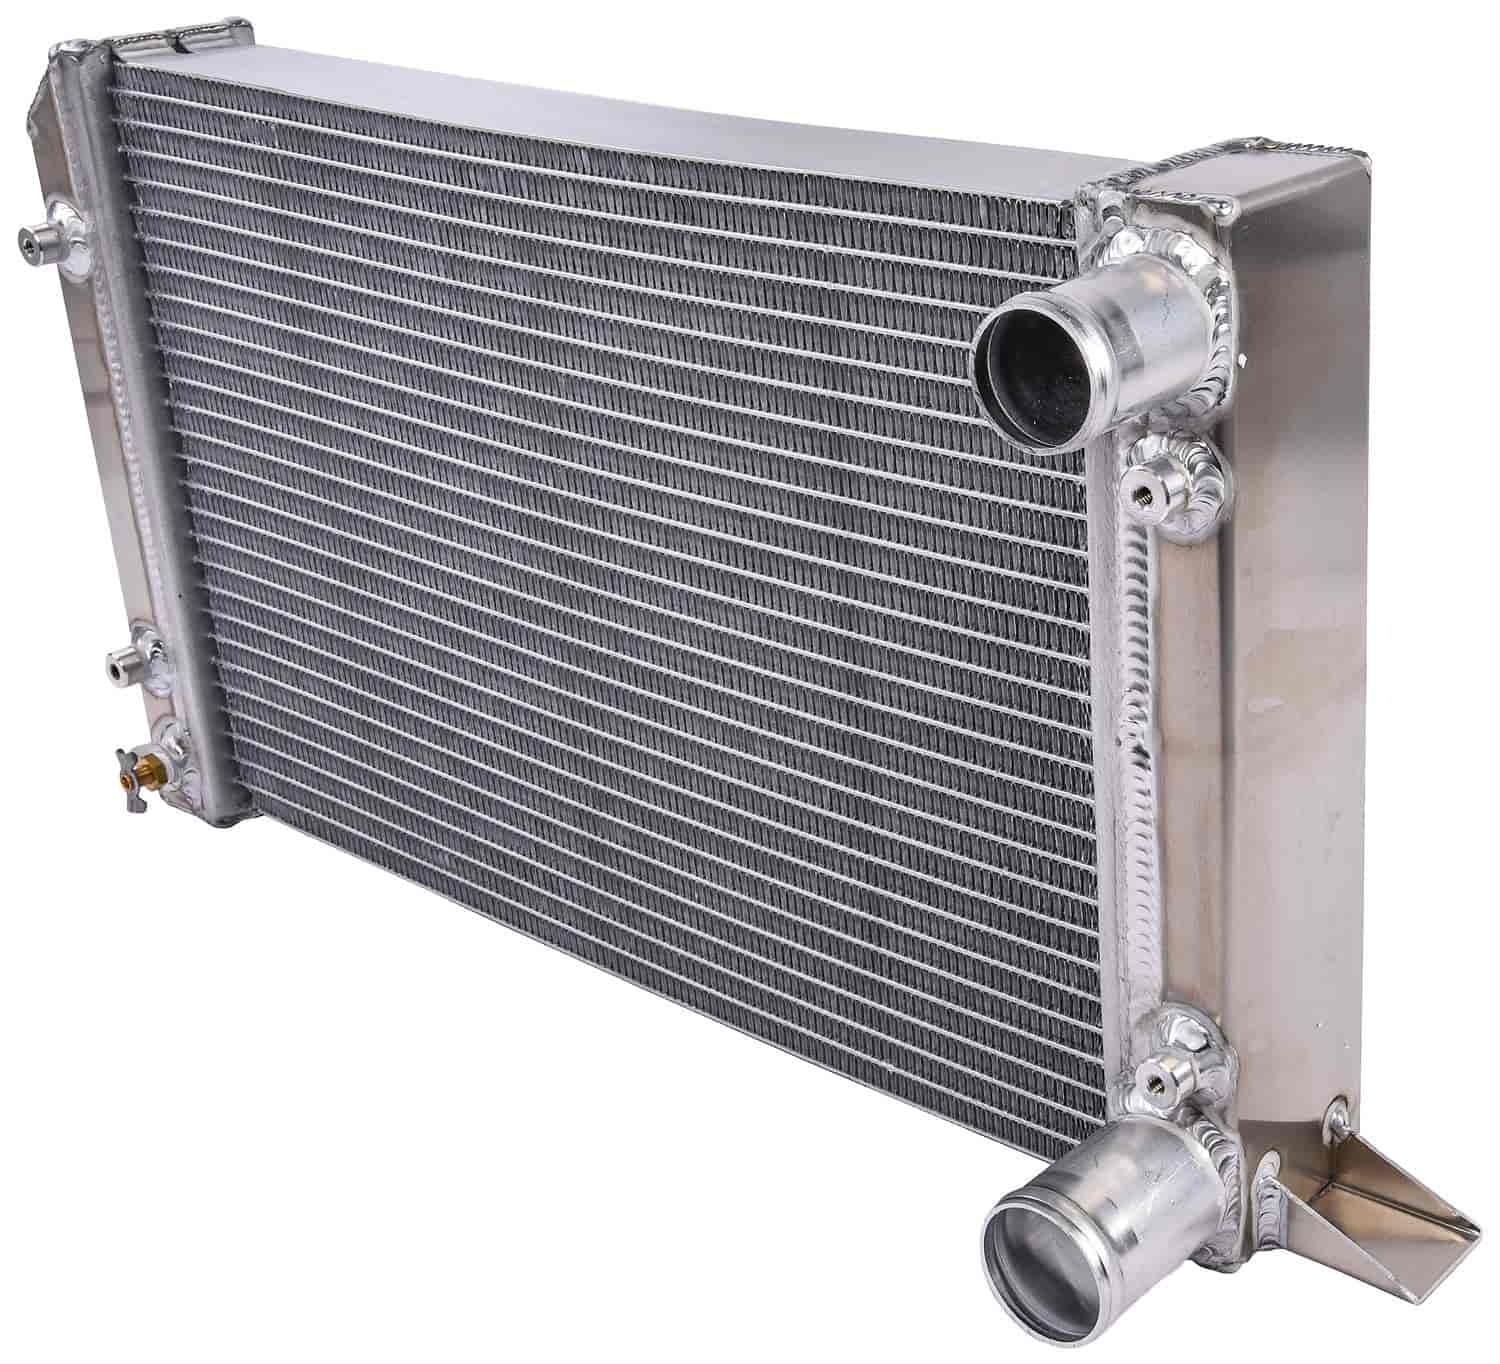 Scirocco/Pro Stock Style Lightweight Aluminum Radiator [2 Row, No Filler Neck, Drag Race Only]